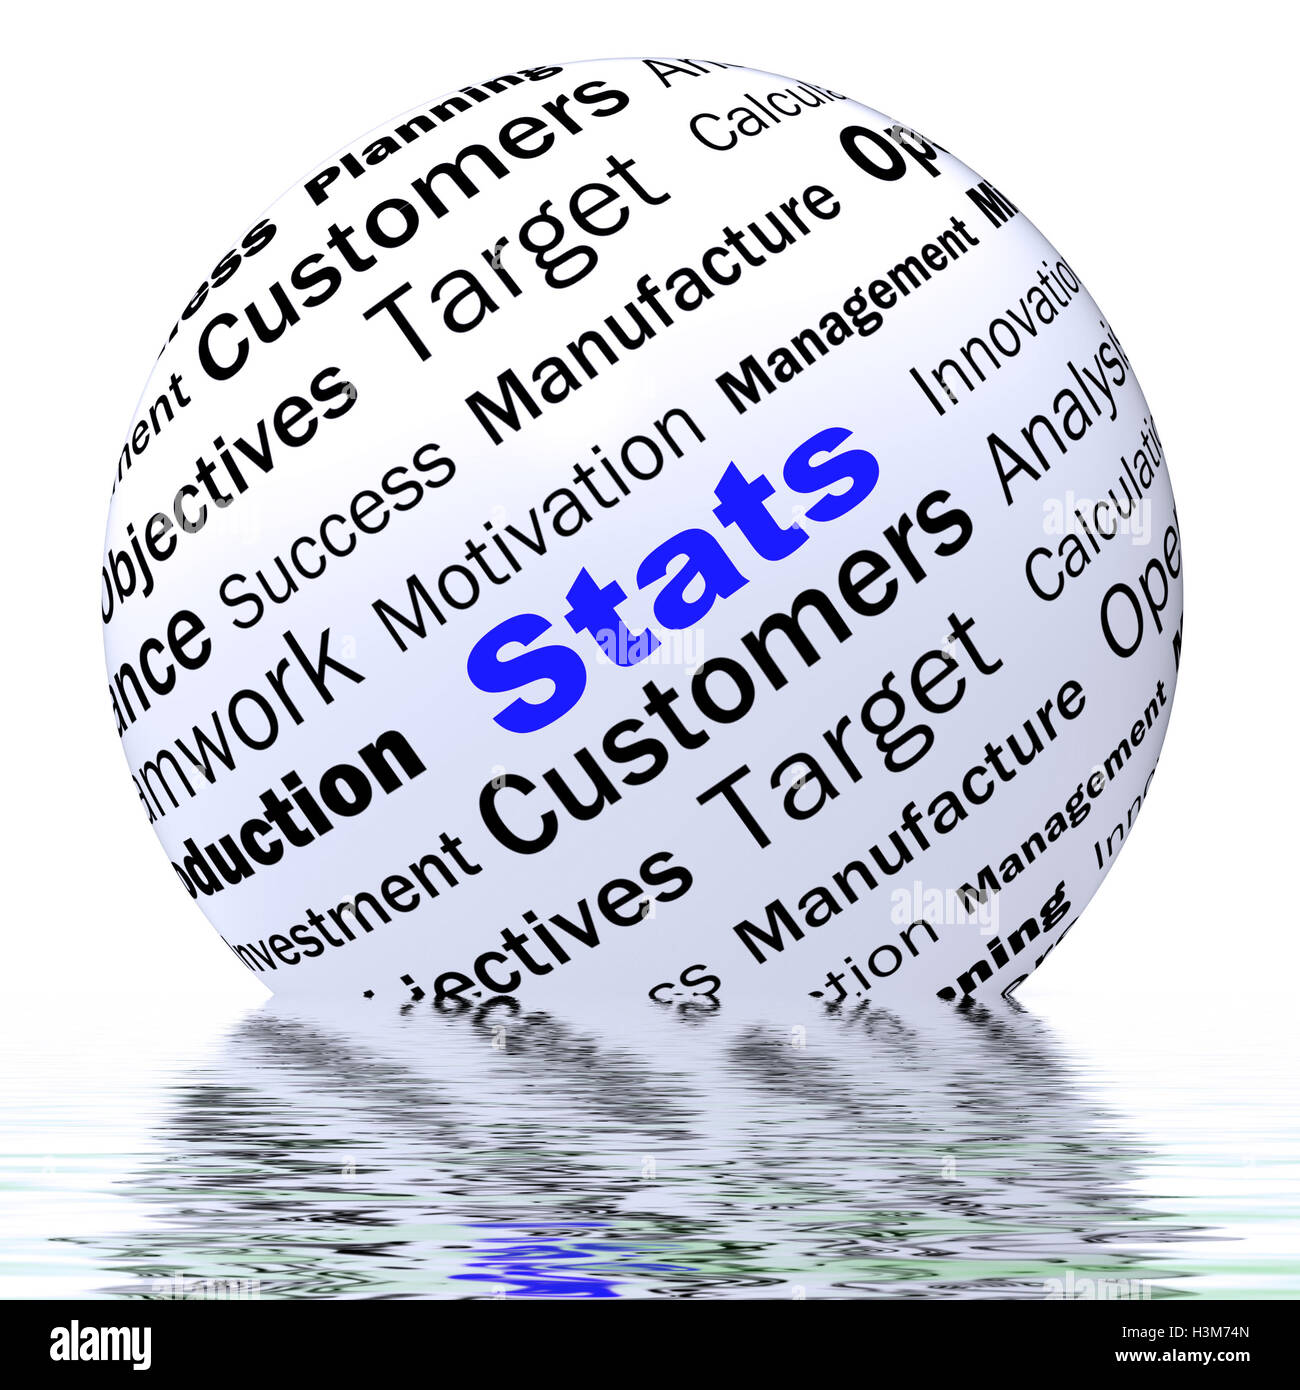 Stats Sphere Definition Displays Business Reports And Figures Stock Photo